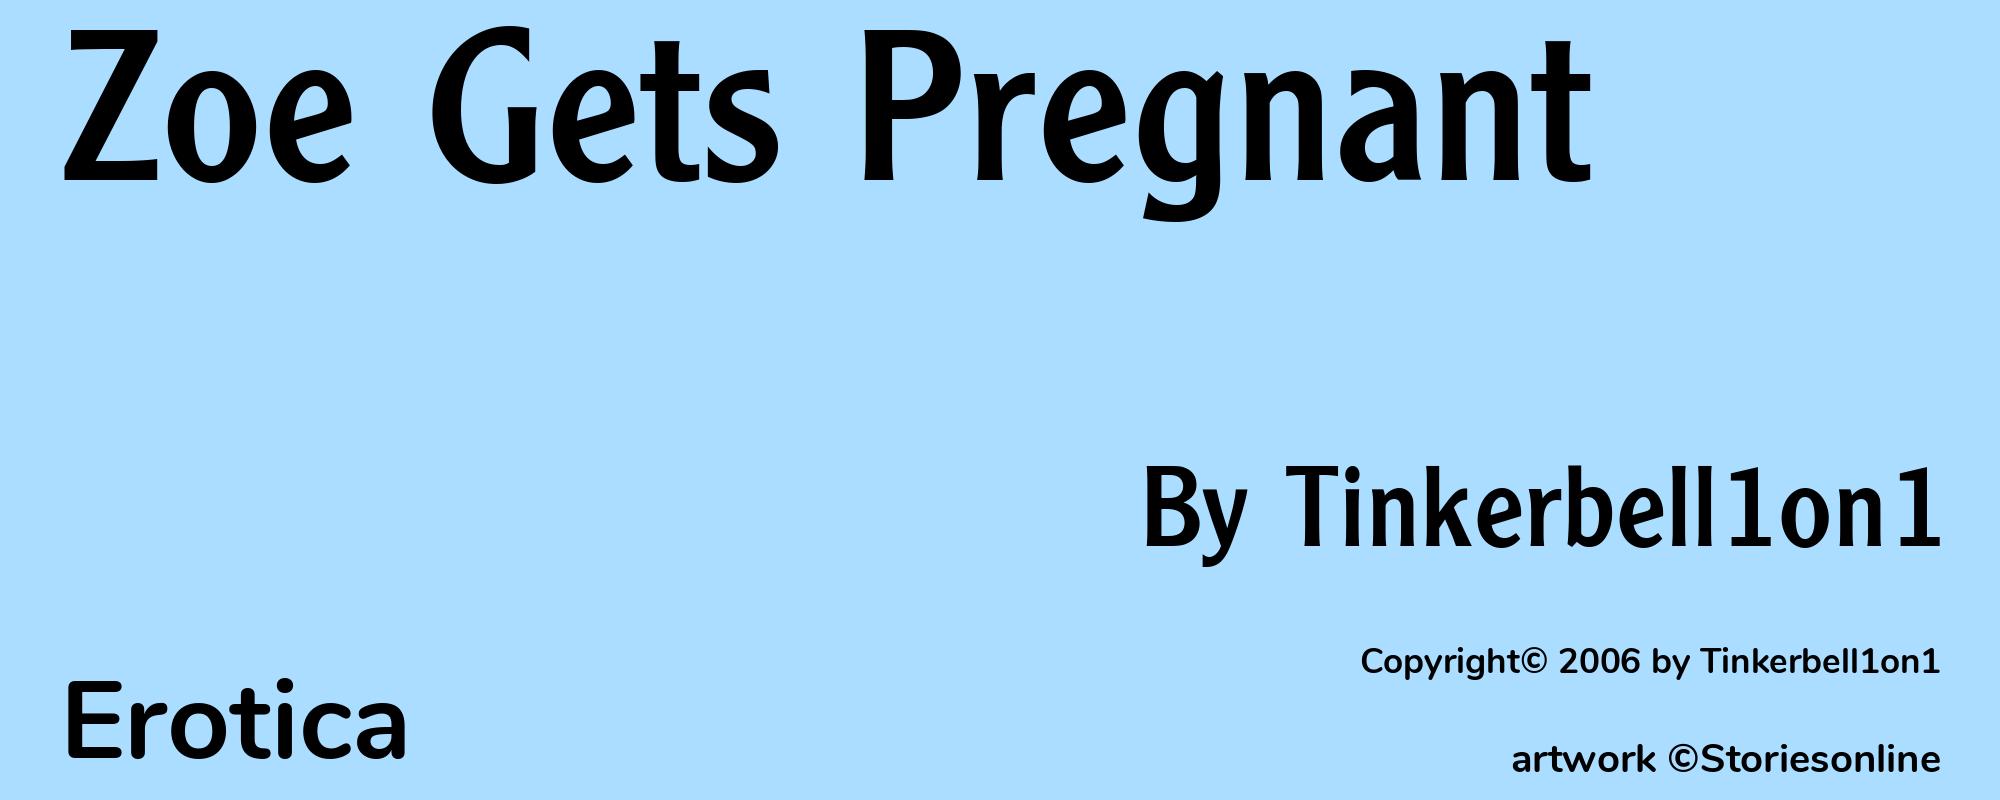 Zoe Gets Pregnant - Cover